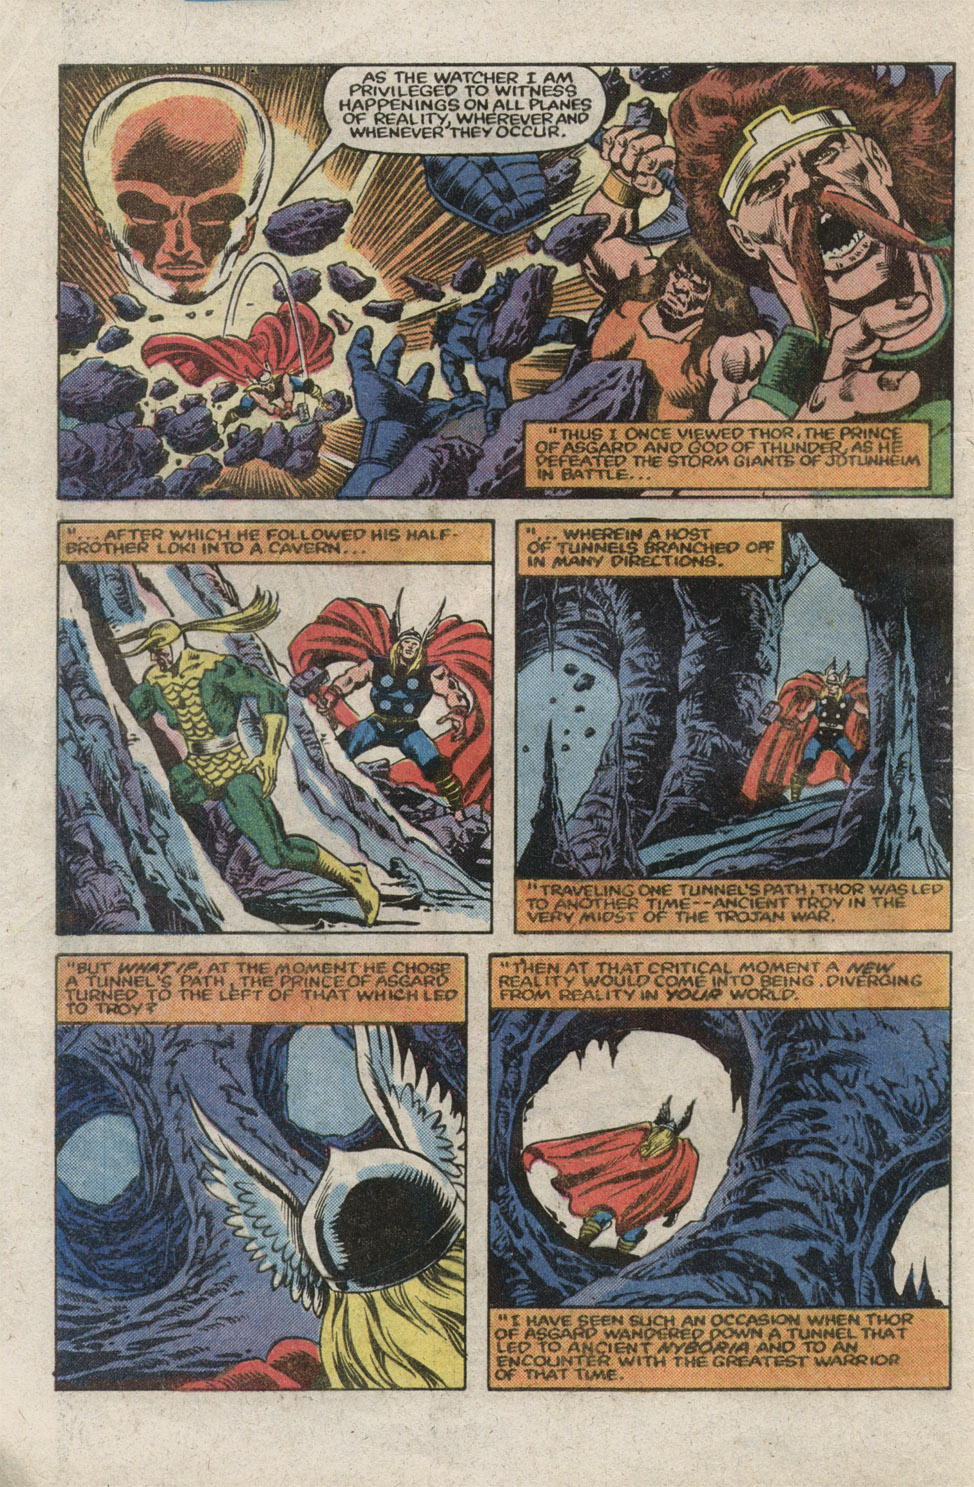 What If? (1977) issue 39 - Thor battled conan - Page 4